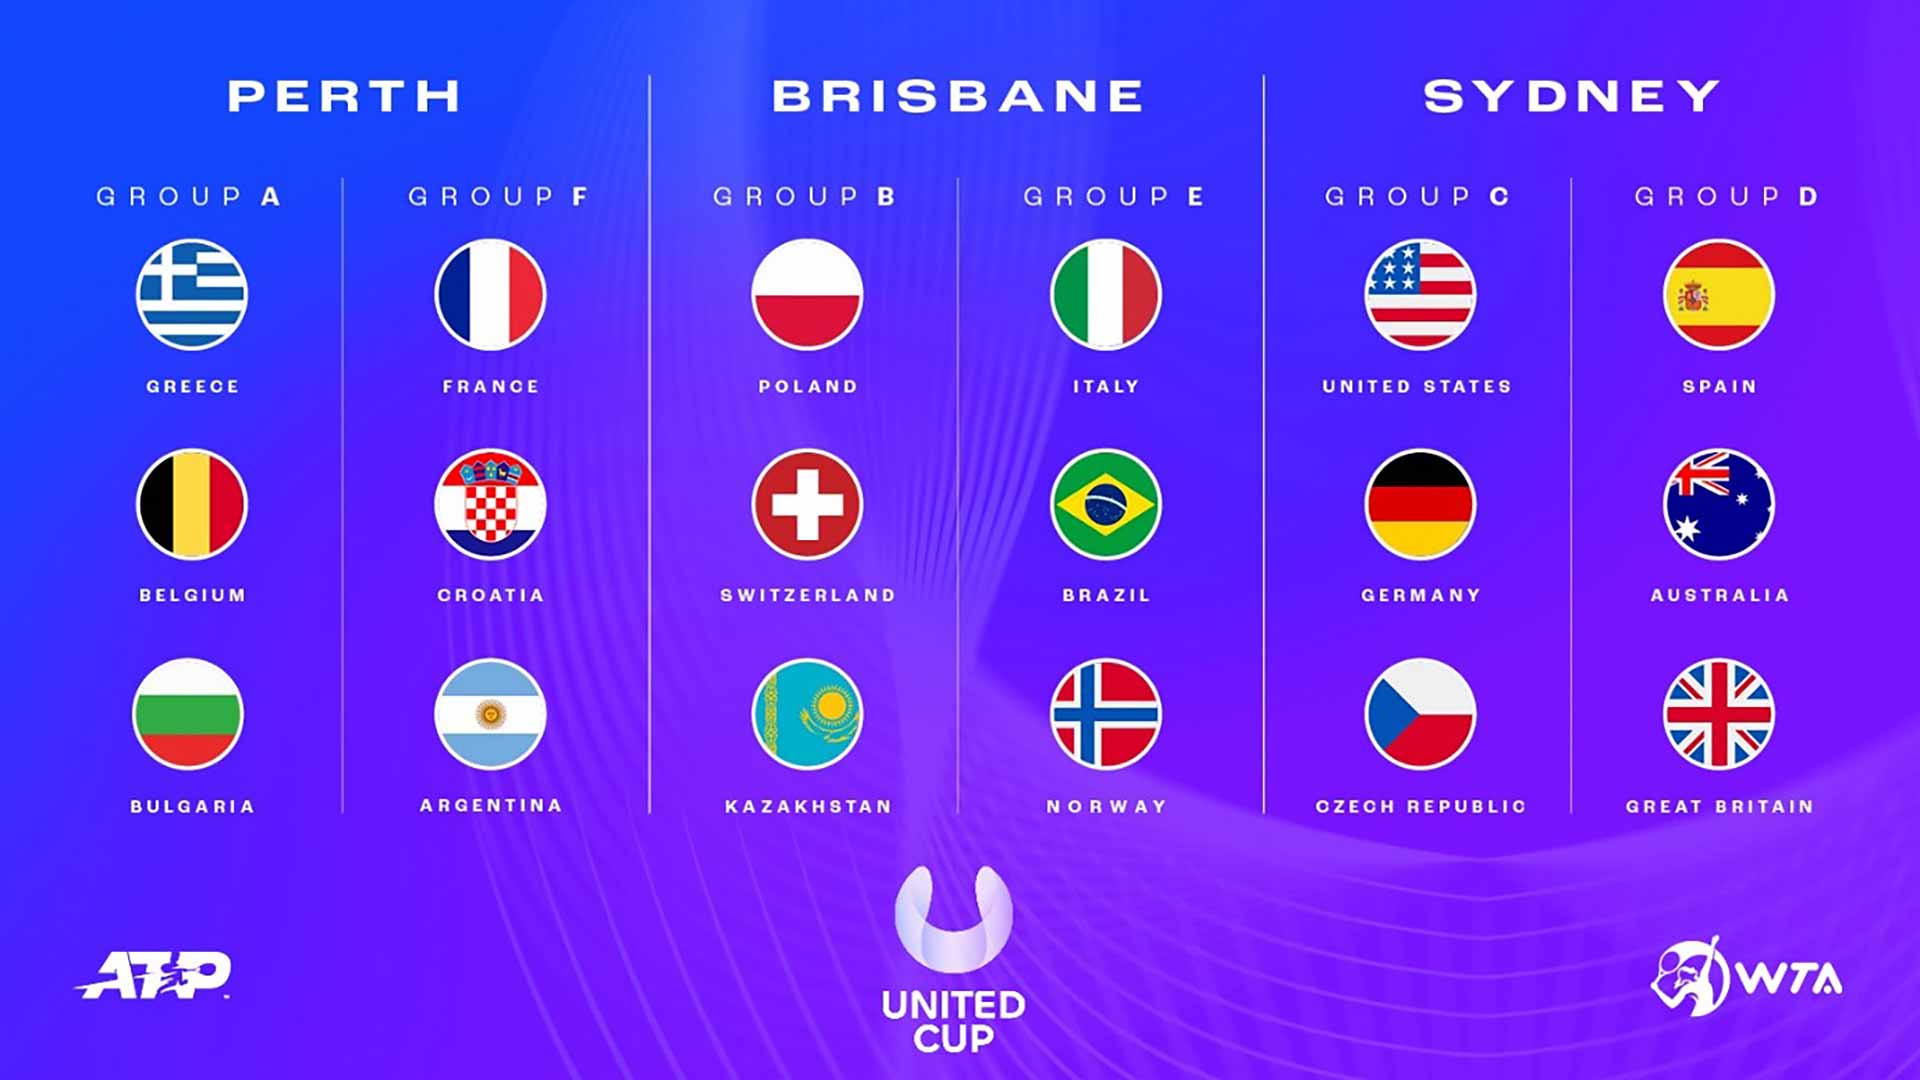 United Cup's 18 countries